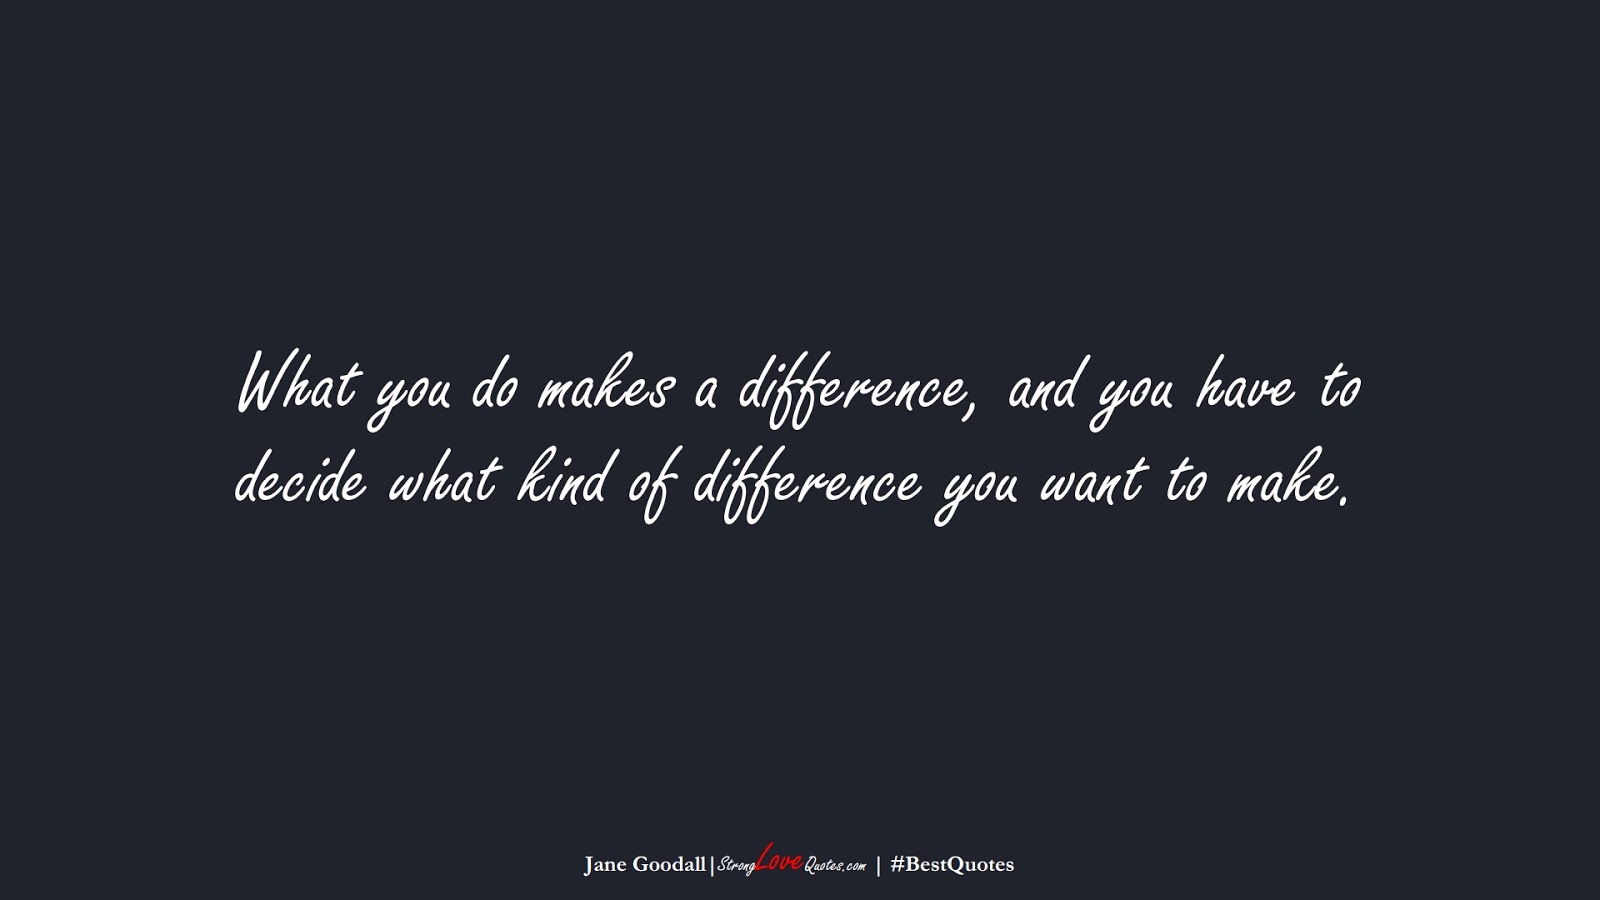 What you do makes a difference, and you have to decide what kind of difference you want to make. (Jane Goodall);  #BestQuotes